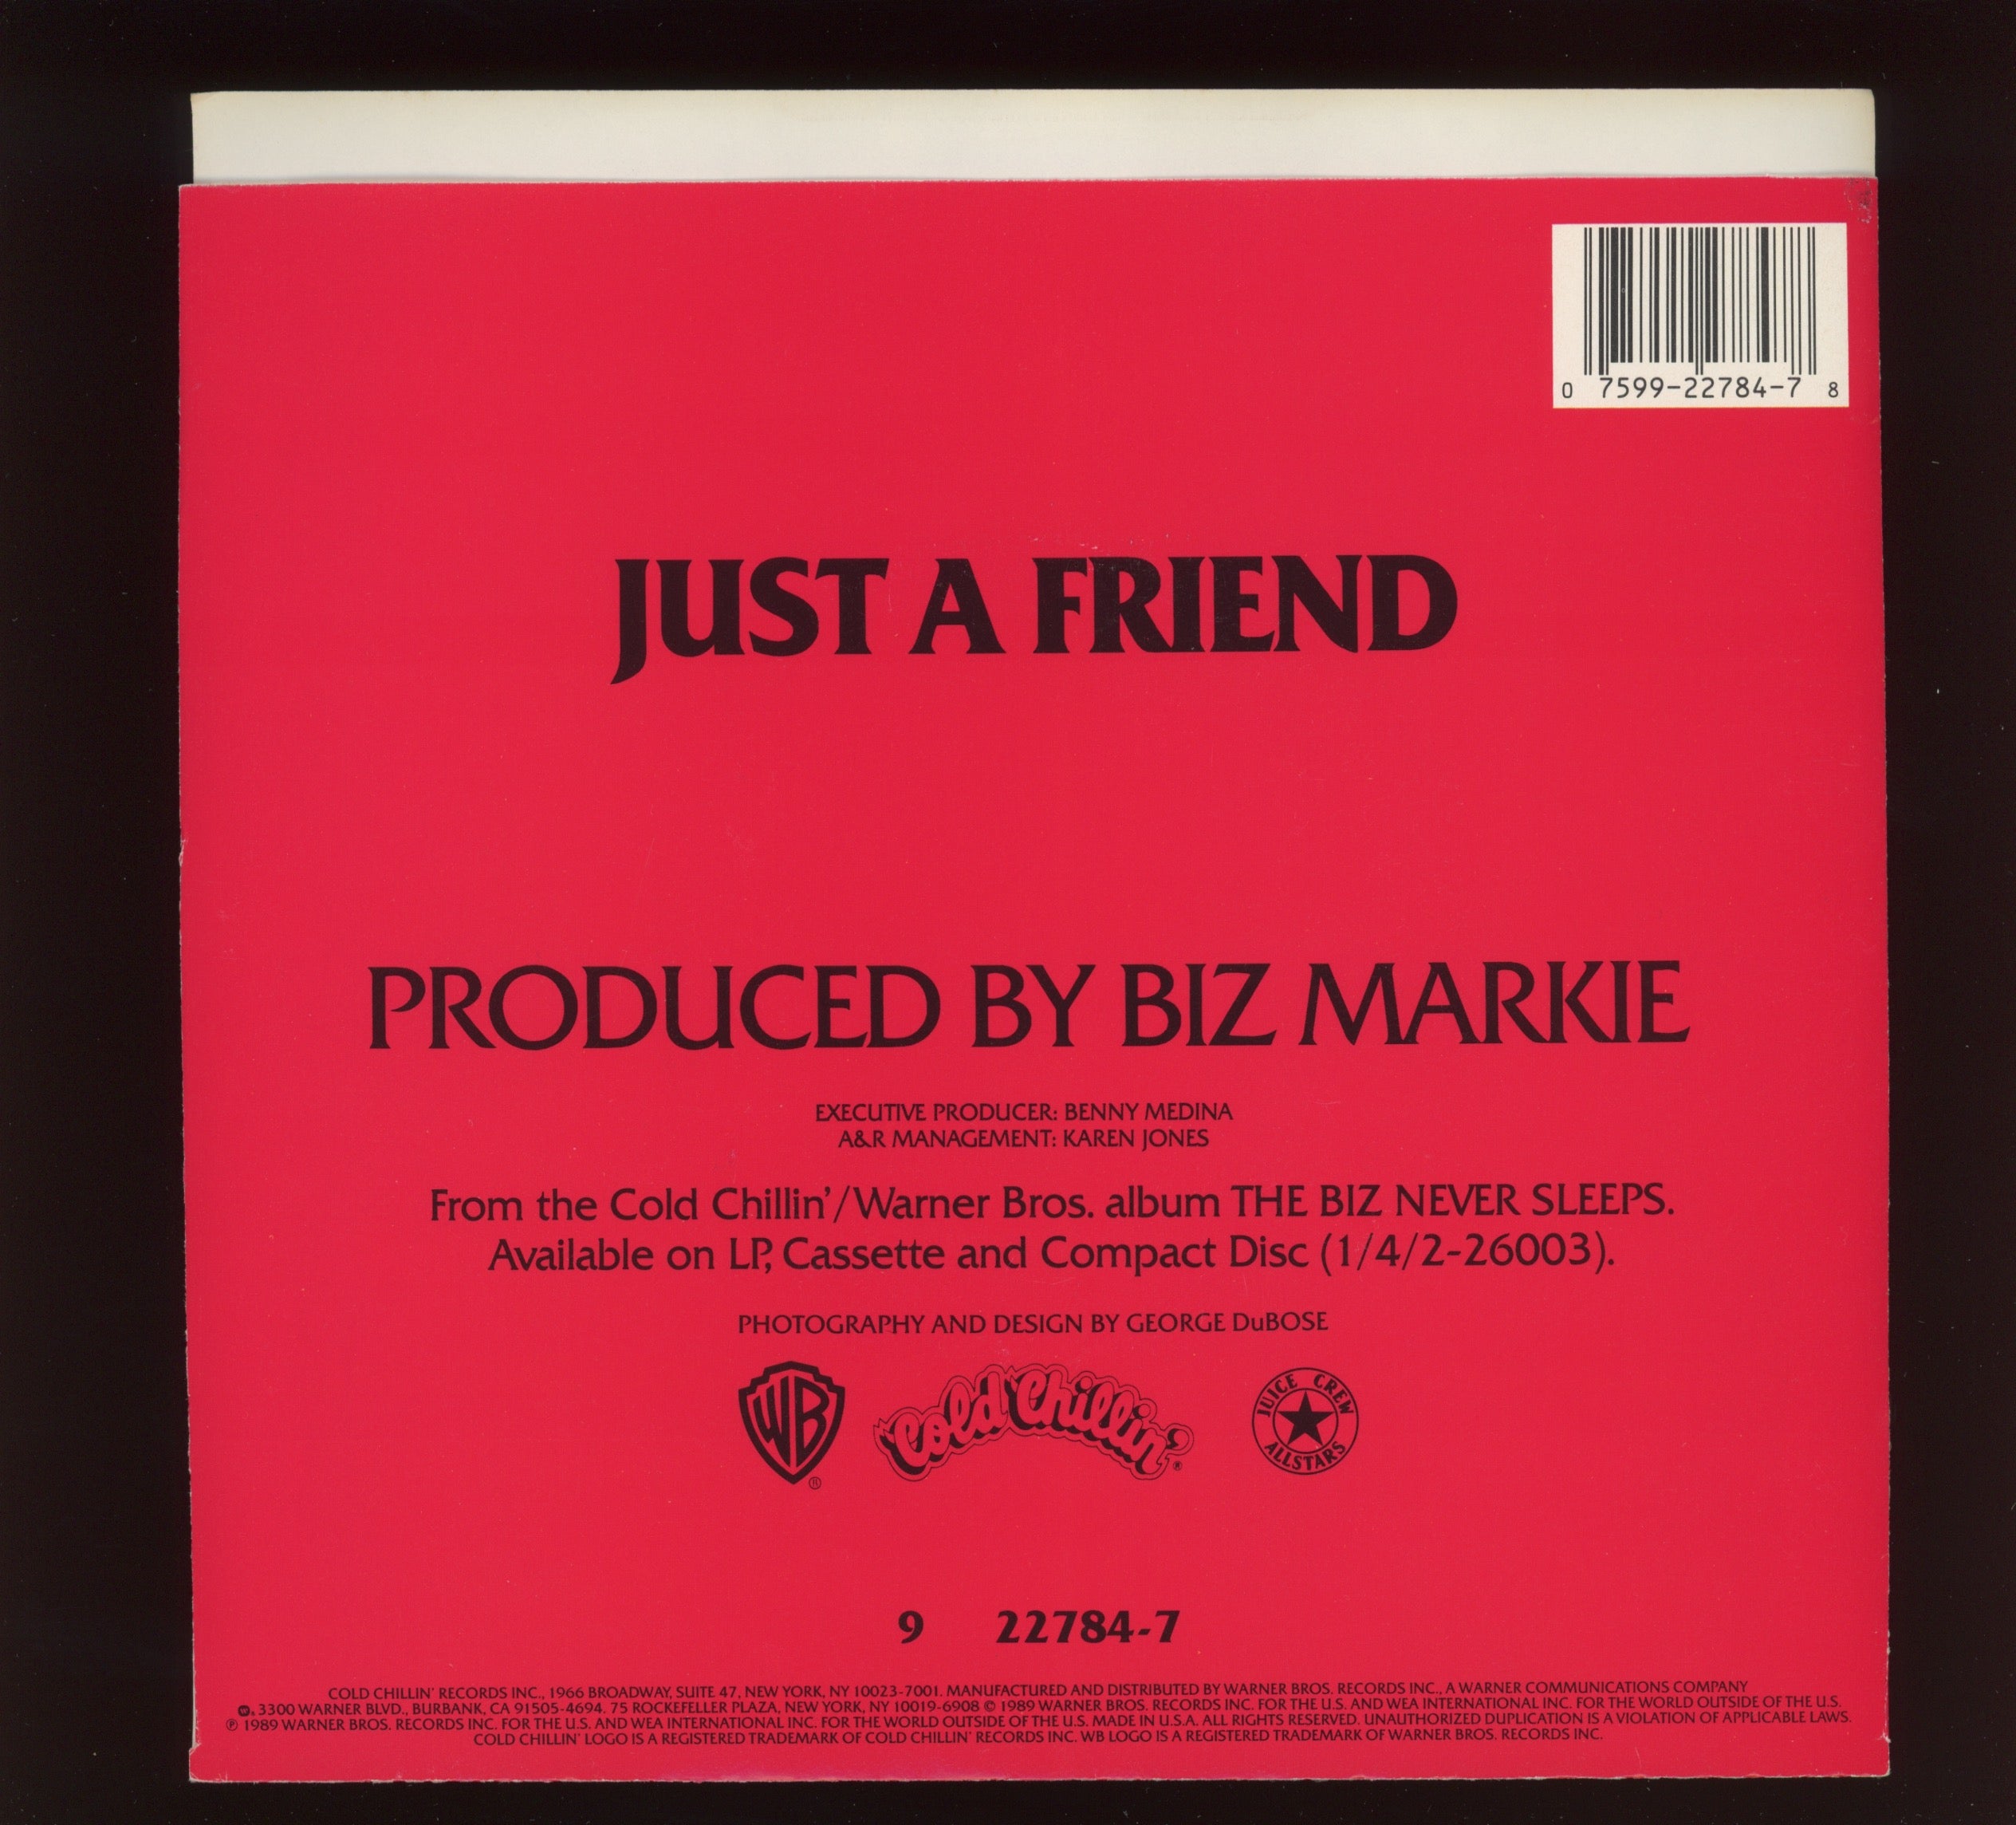 Biz Markie - Just A Friend on Cold Chillin' With Picture Sleeve